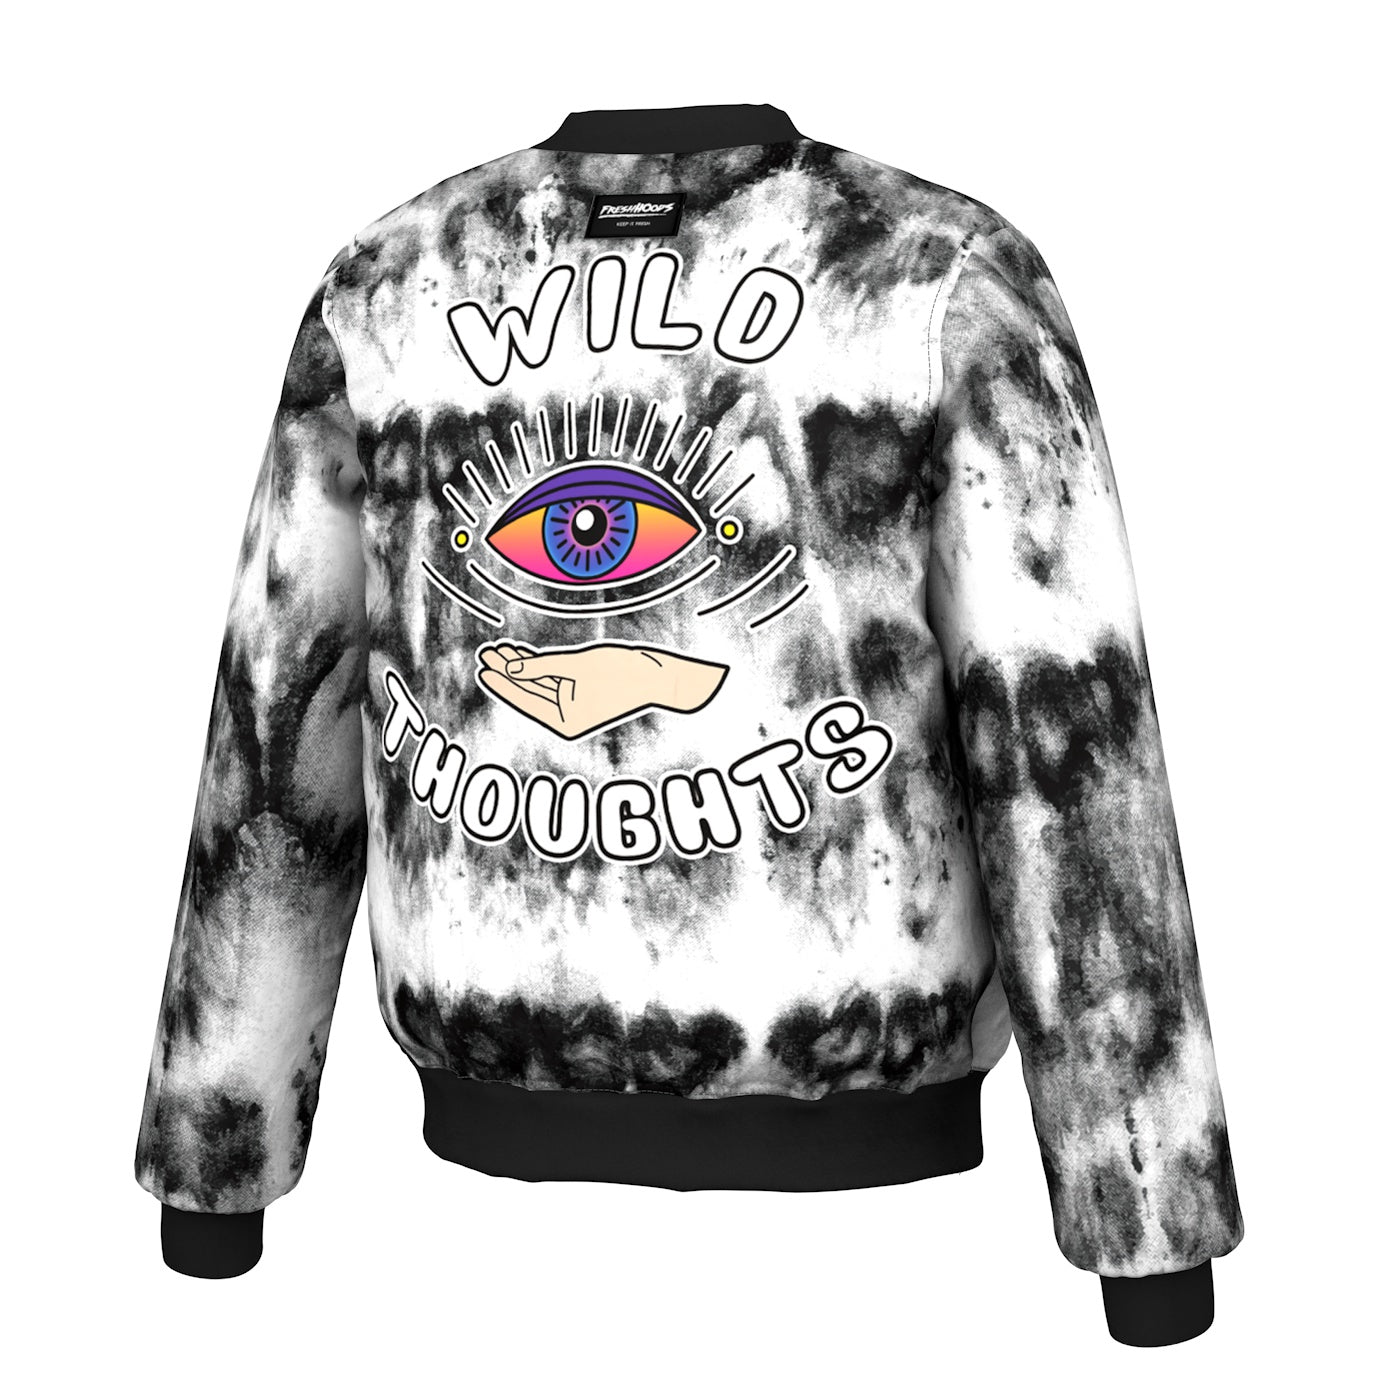 Wild Thoughts Bomber Jacket